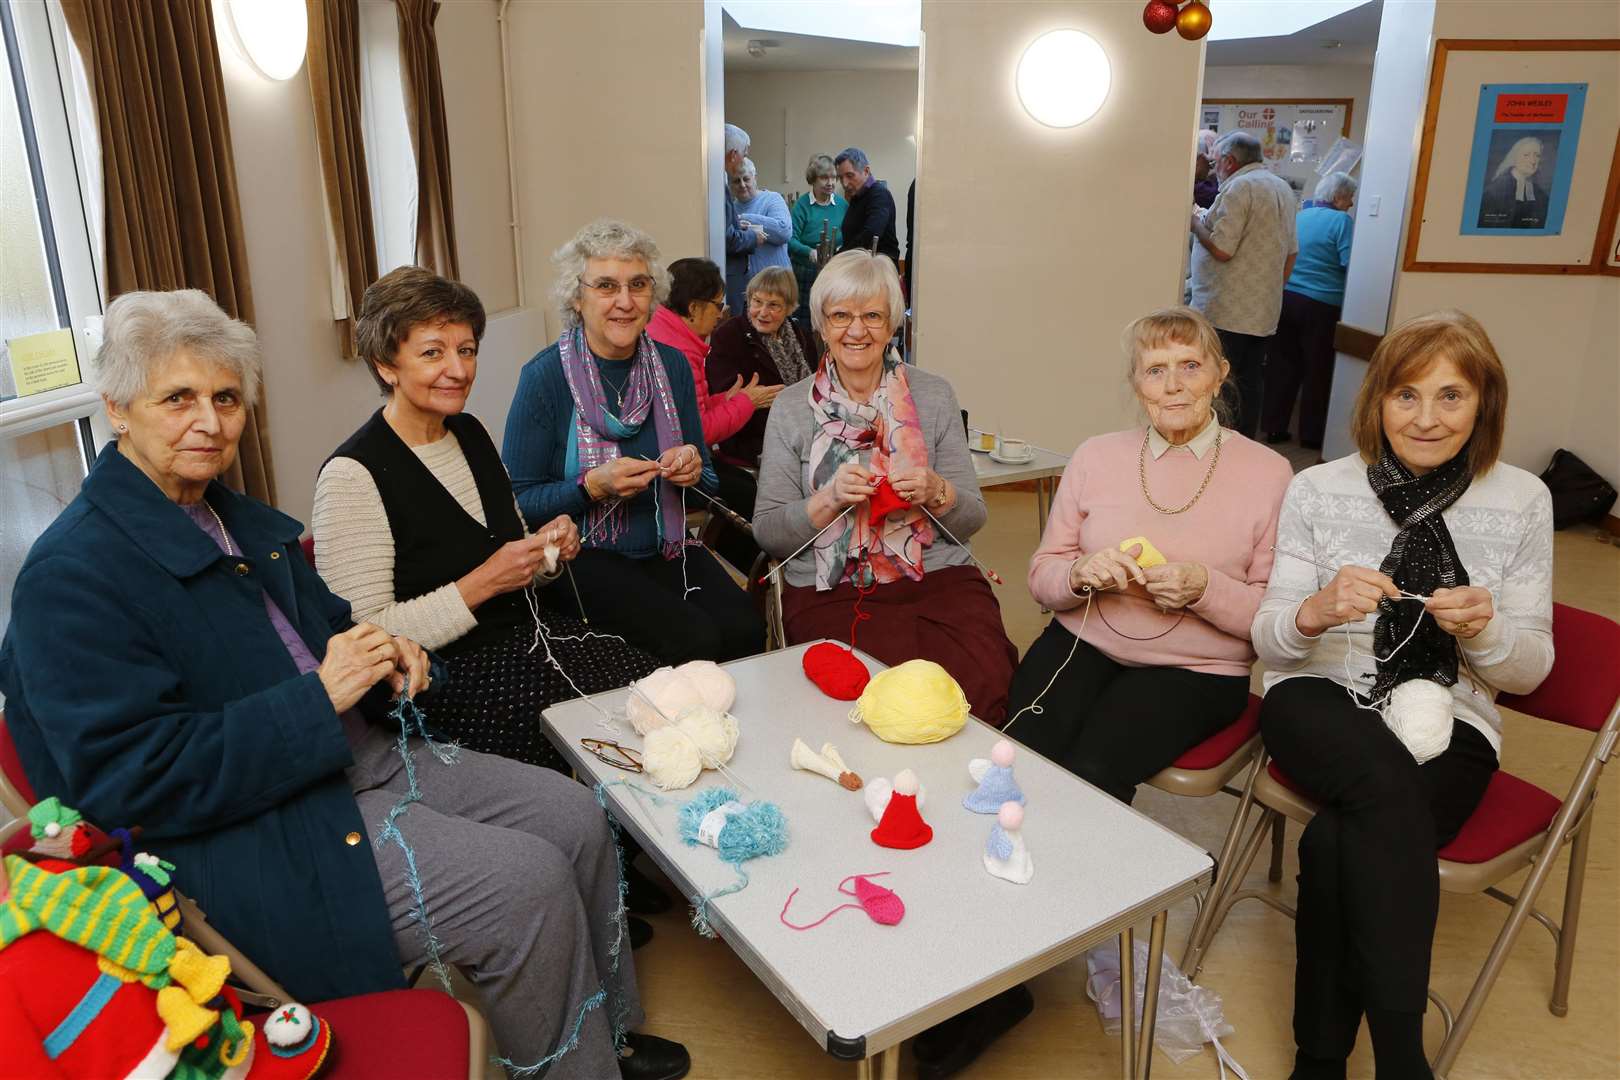 Some of the ladies who knitted the angels at Bearsted Methodist Church. From left: Norma Bennett, Alison Muir, Sue Byard, Margaret Adamson, June Butterworth and Margaret Adams.